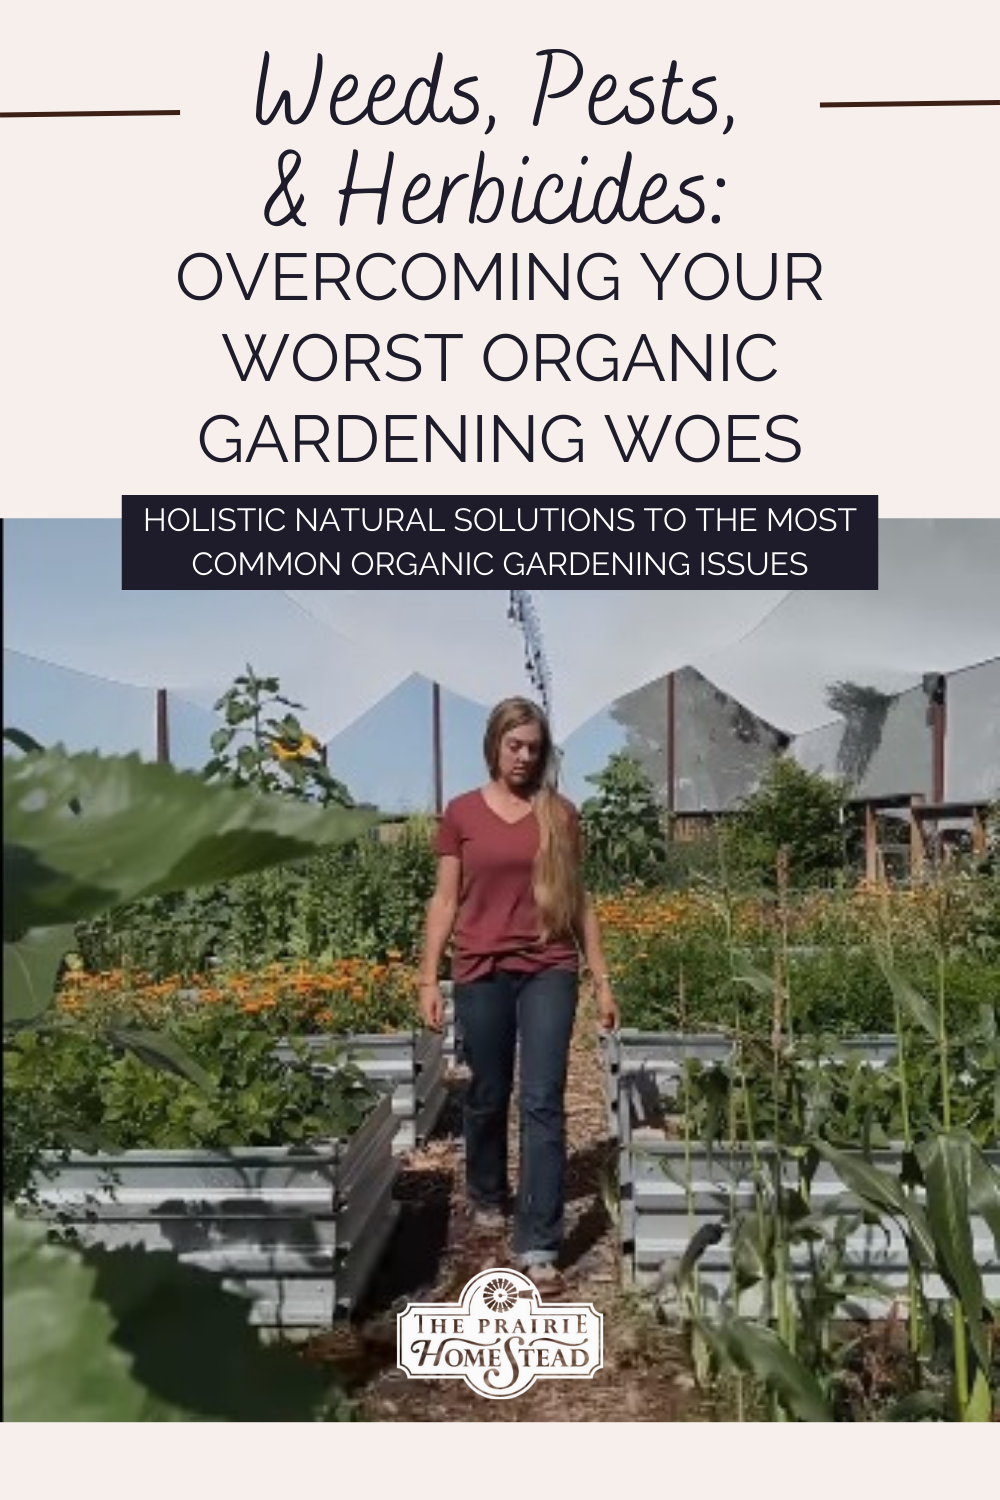 Weeds, Pests, & Herbicides: Overcoming Your Worst Organic Gardening Woes